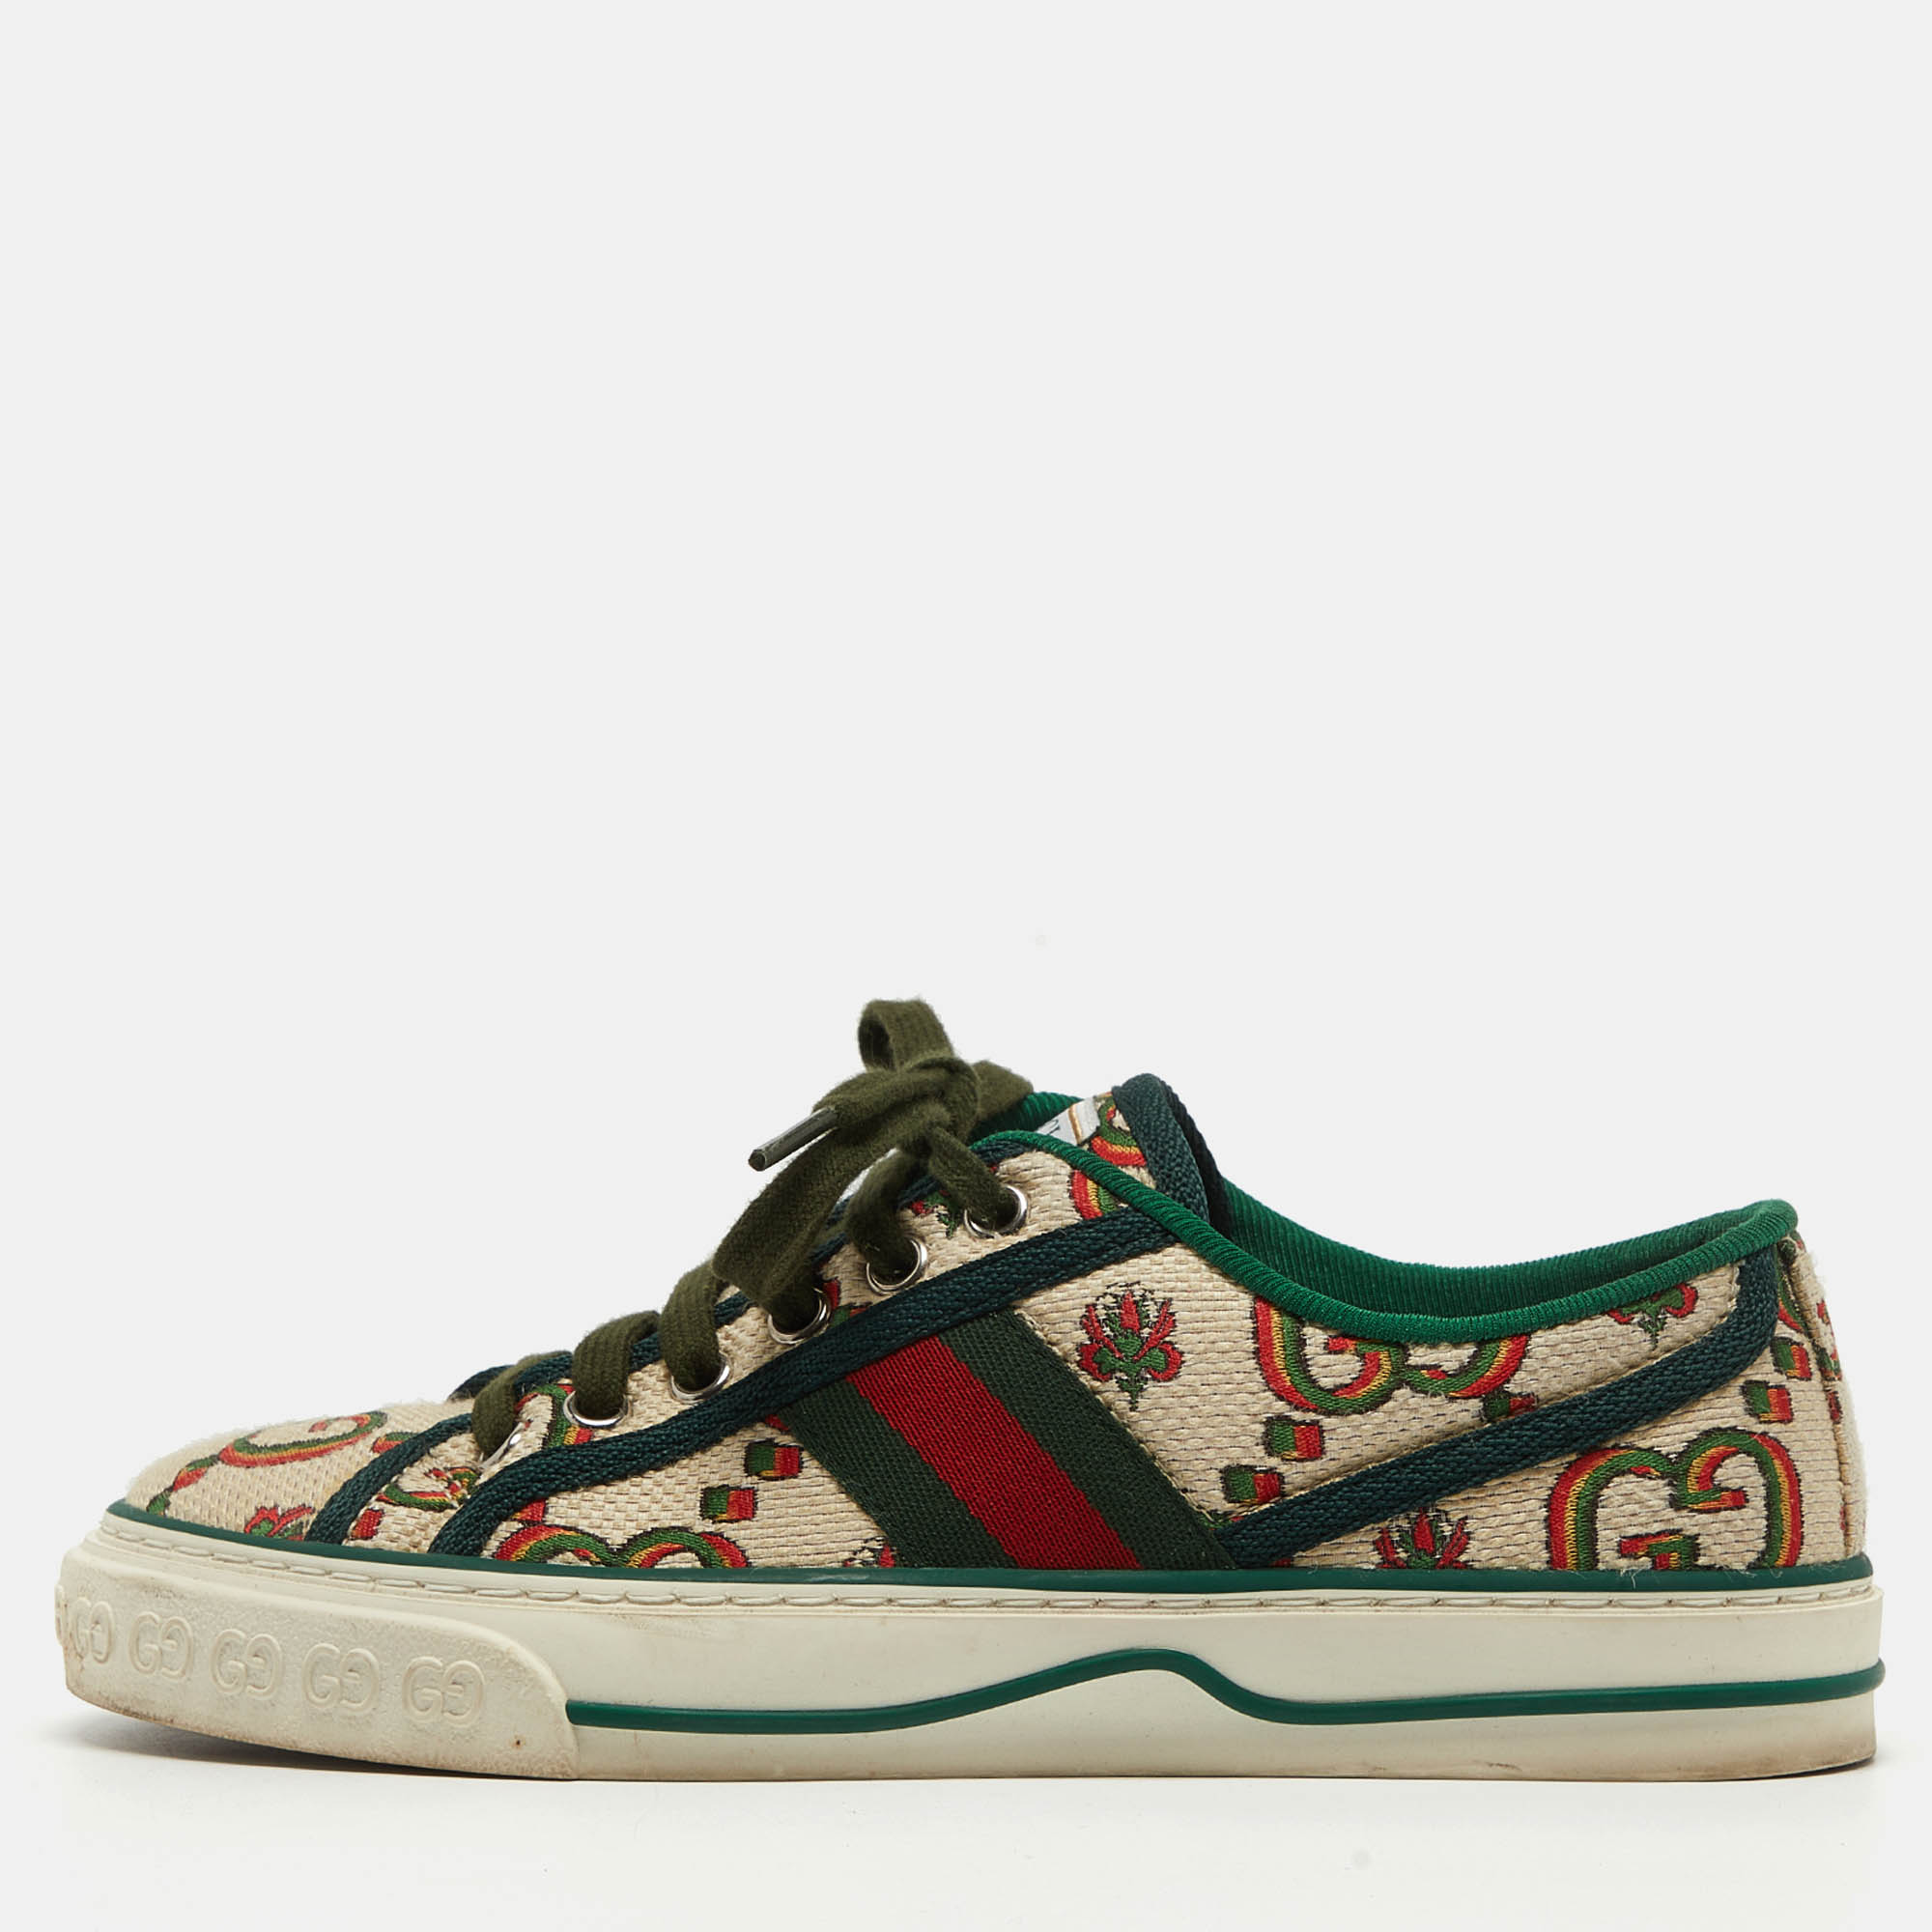 Gucci multicolor gg canvas tennis 1977 low top sneakers size 35.5